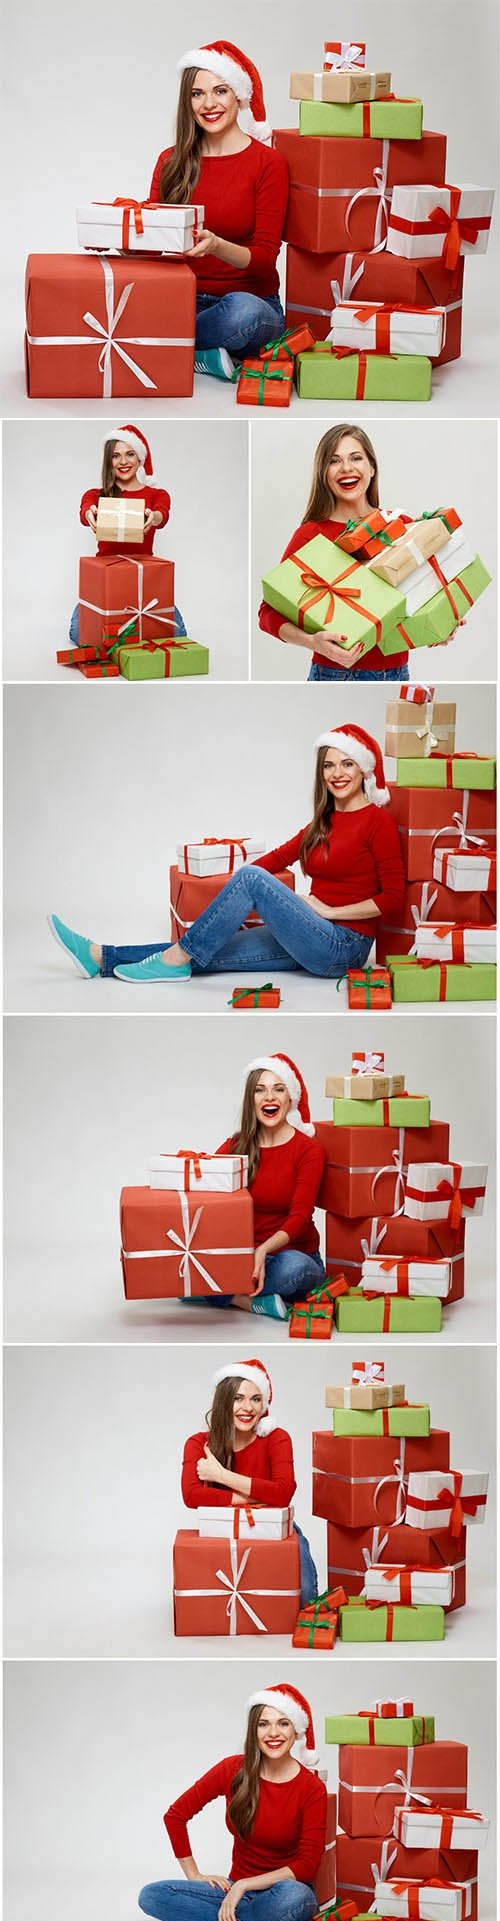 New Year and Christmas stock photos - 80